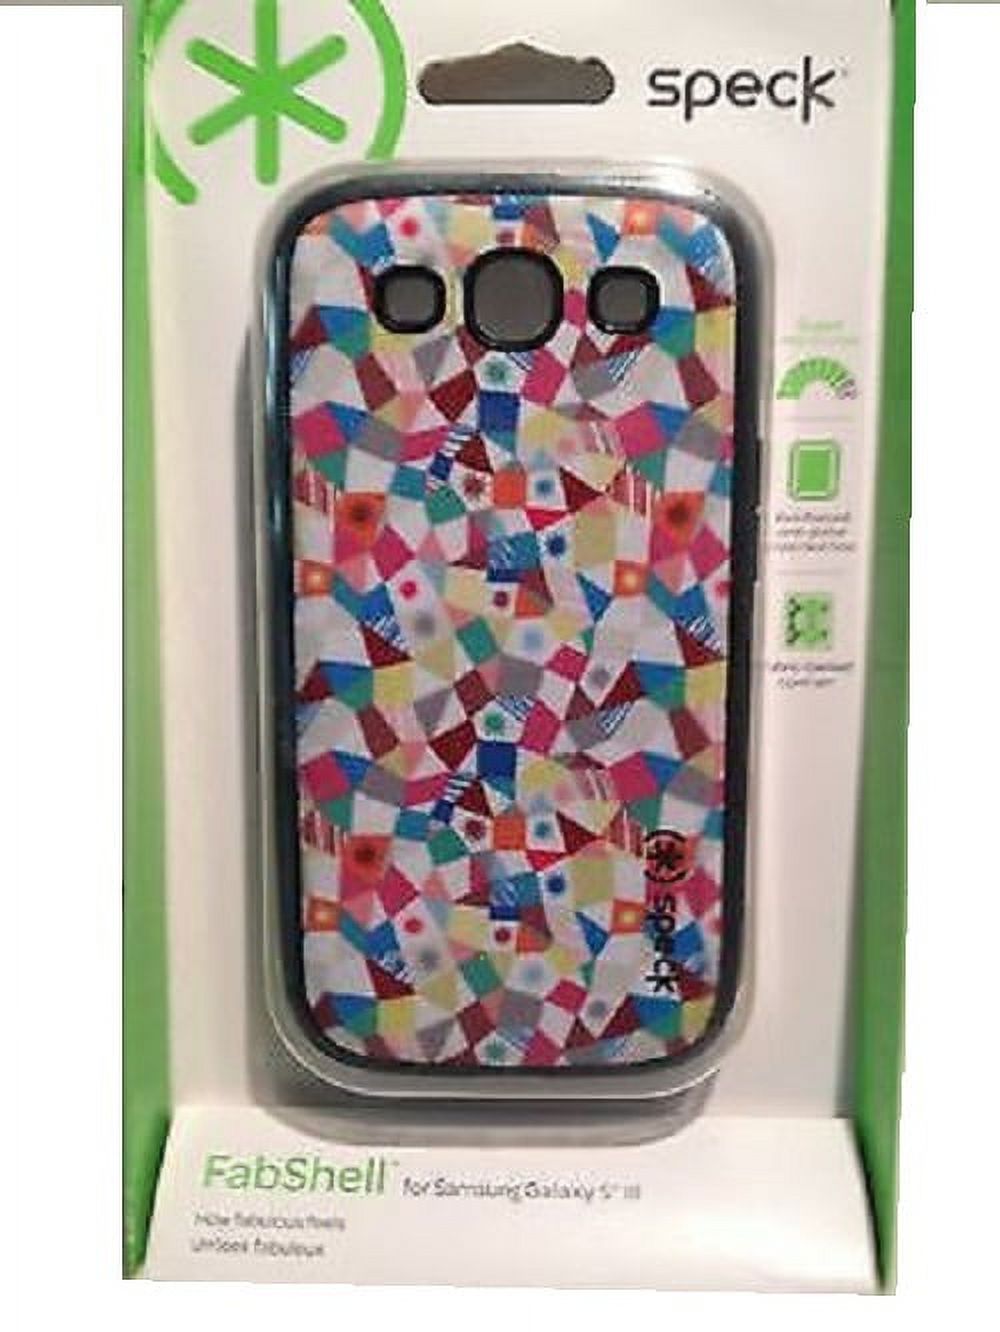 Speck FabShell for Samsung Galaxy S III - image 3 of 3